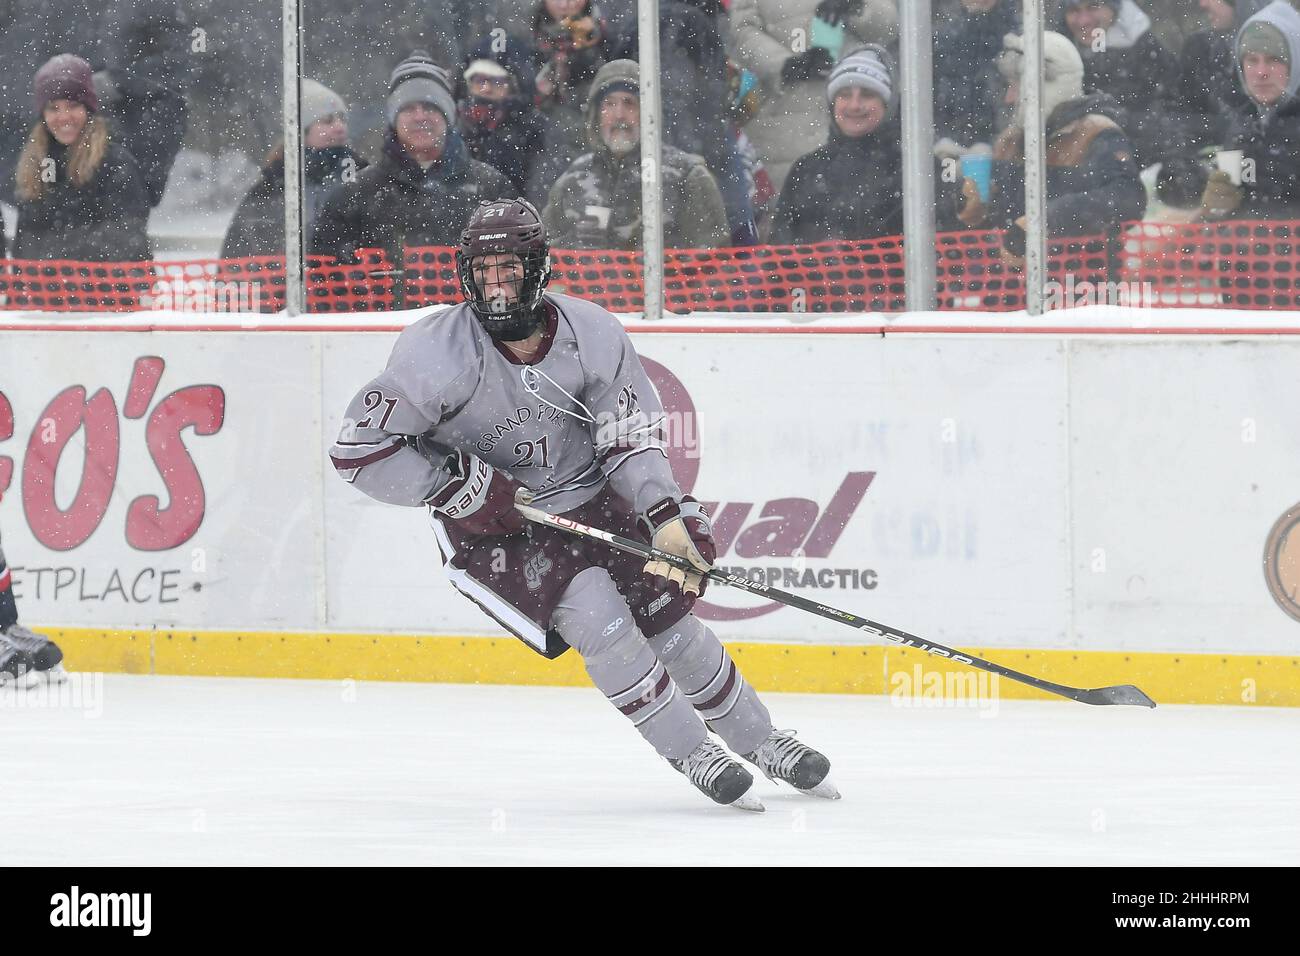 Grand Forks Central Knights skater Rylan Hoffman (21) watches for a pass as the crowd looks on during the 3rd annual Hockey Day North Dakota outdoor hockey event in Jamestown, ND. Youth, high school and college hockey teams from around North Dakota competed over two days. By Russell Hons/CSM Stock Photo